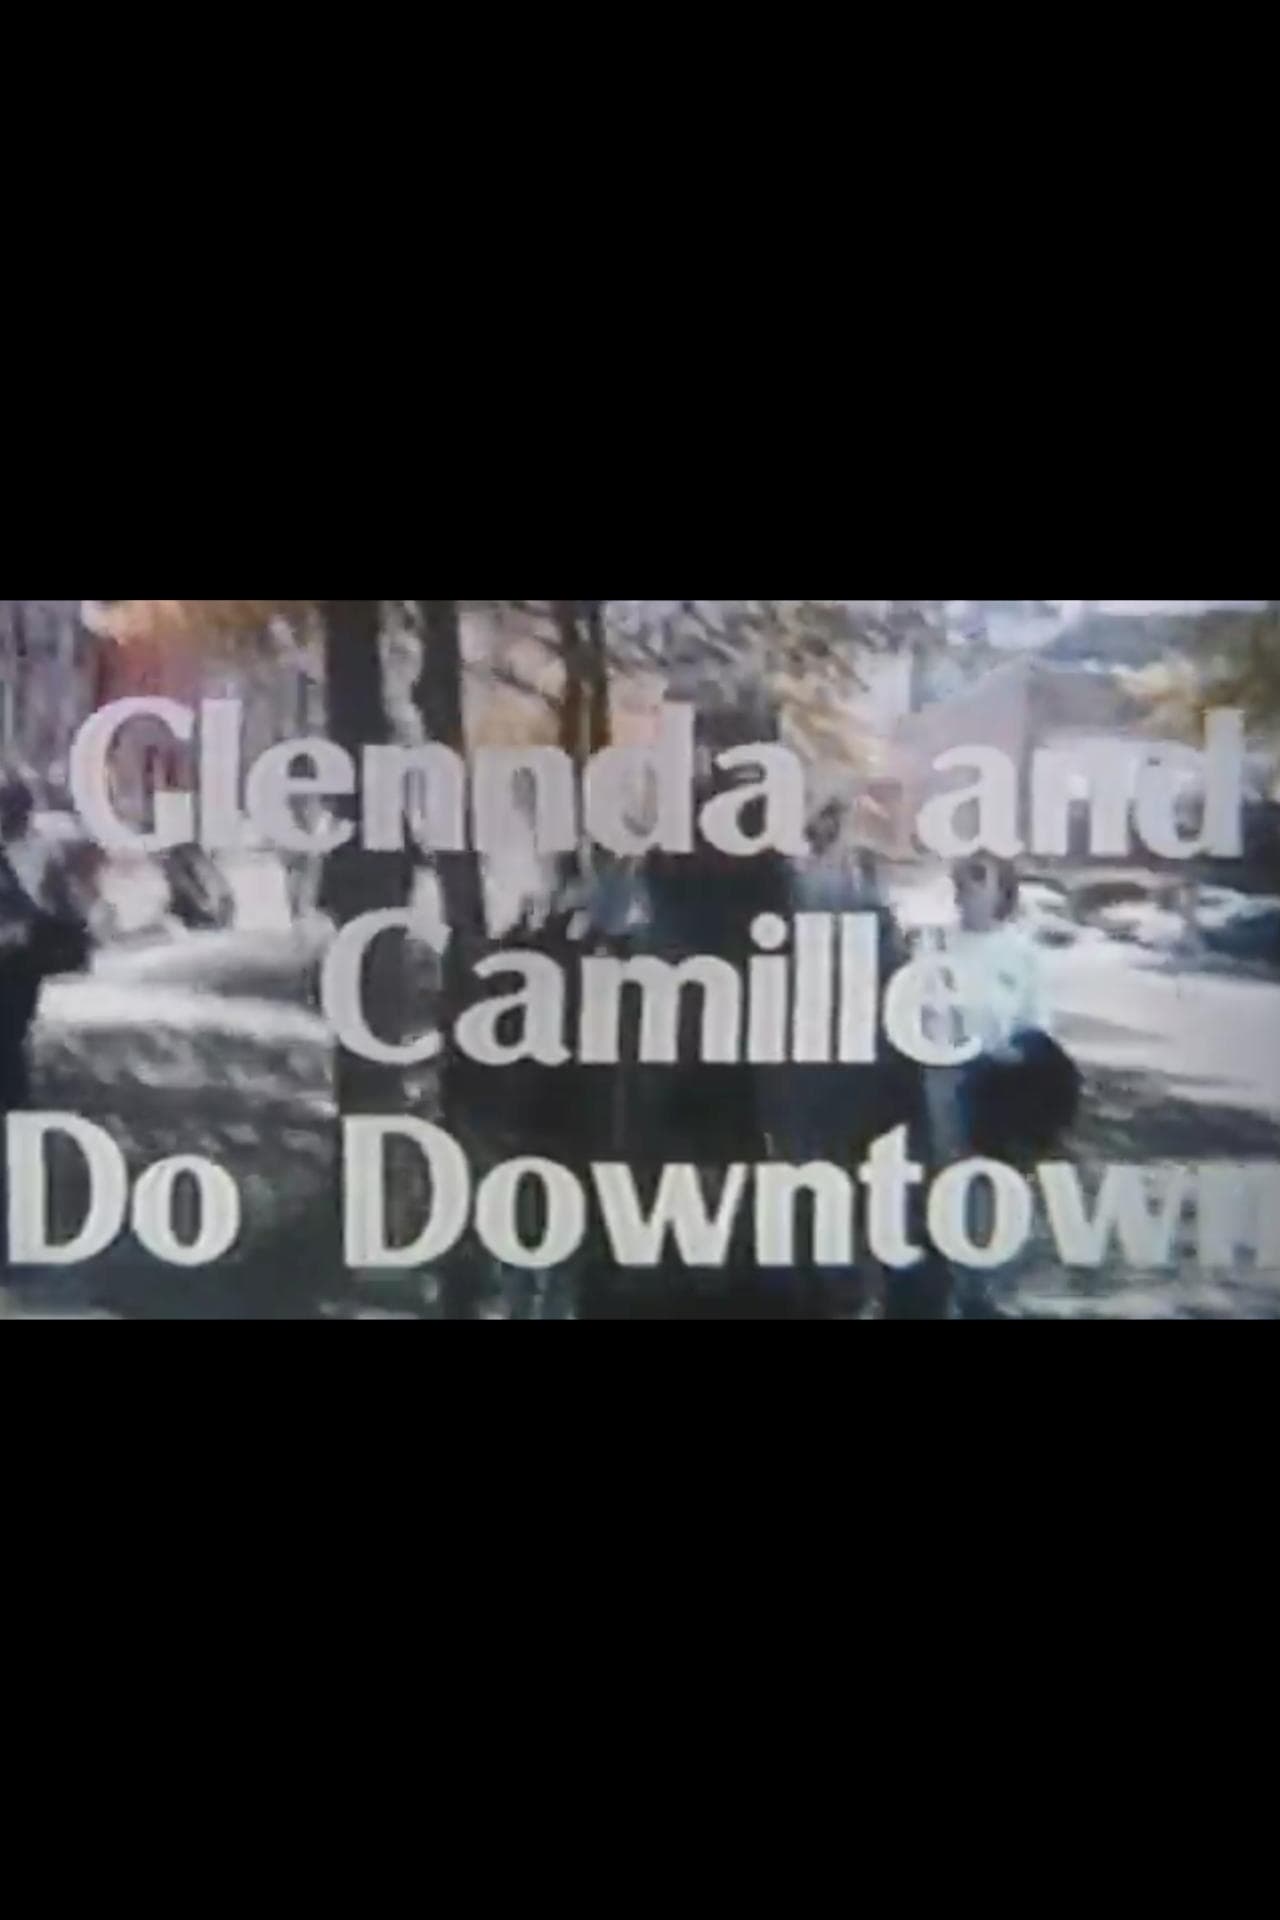 Glennda and Camille Do Downtown